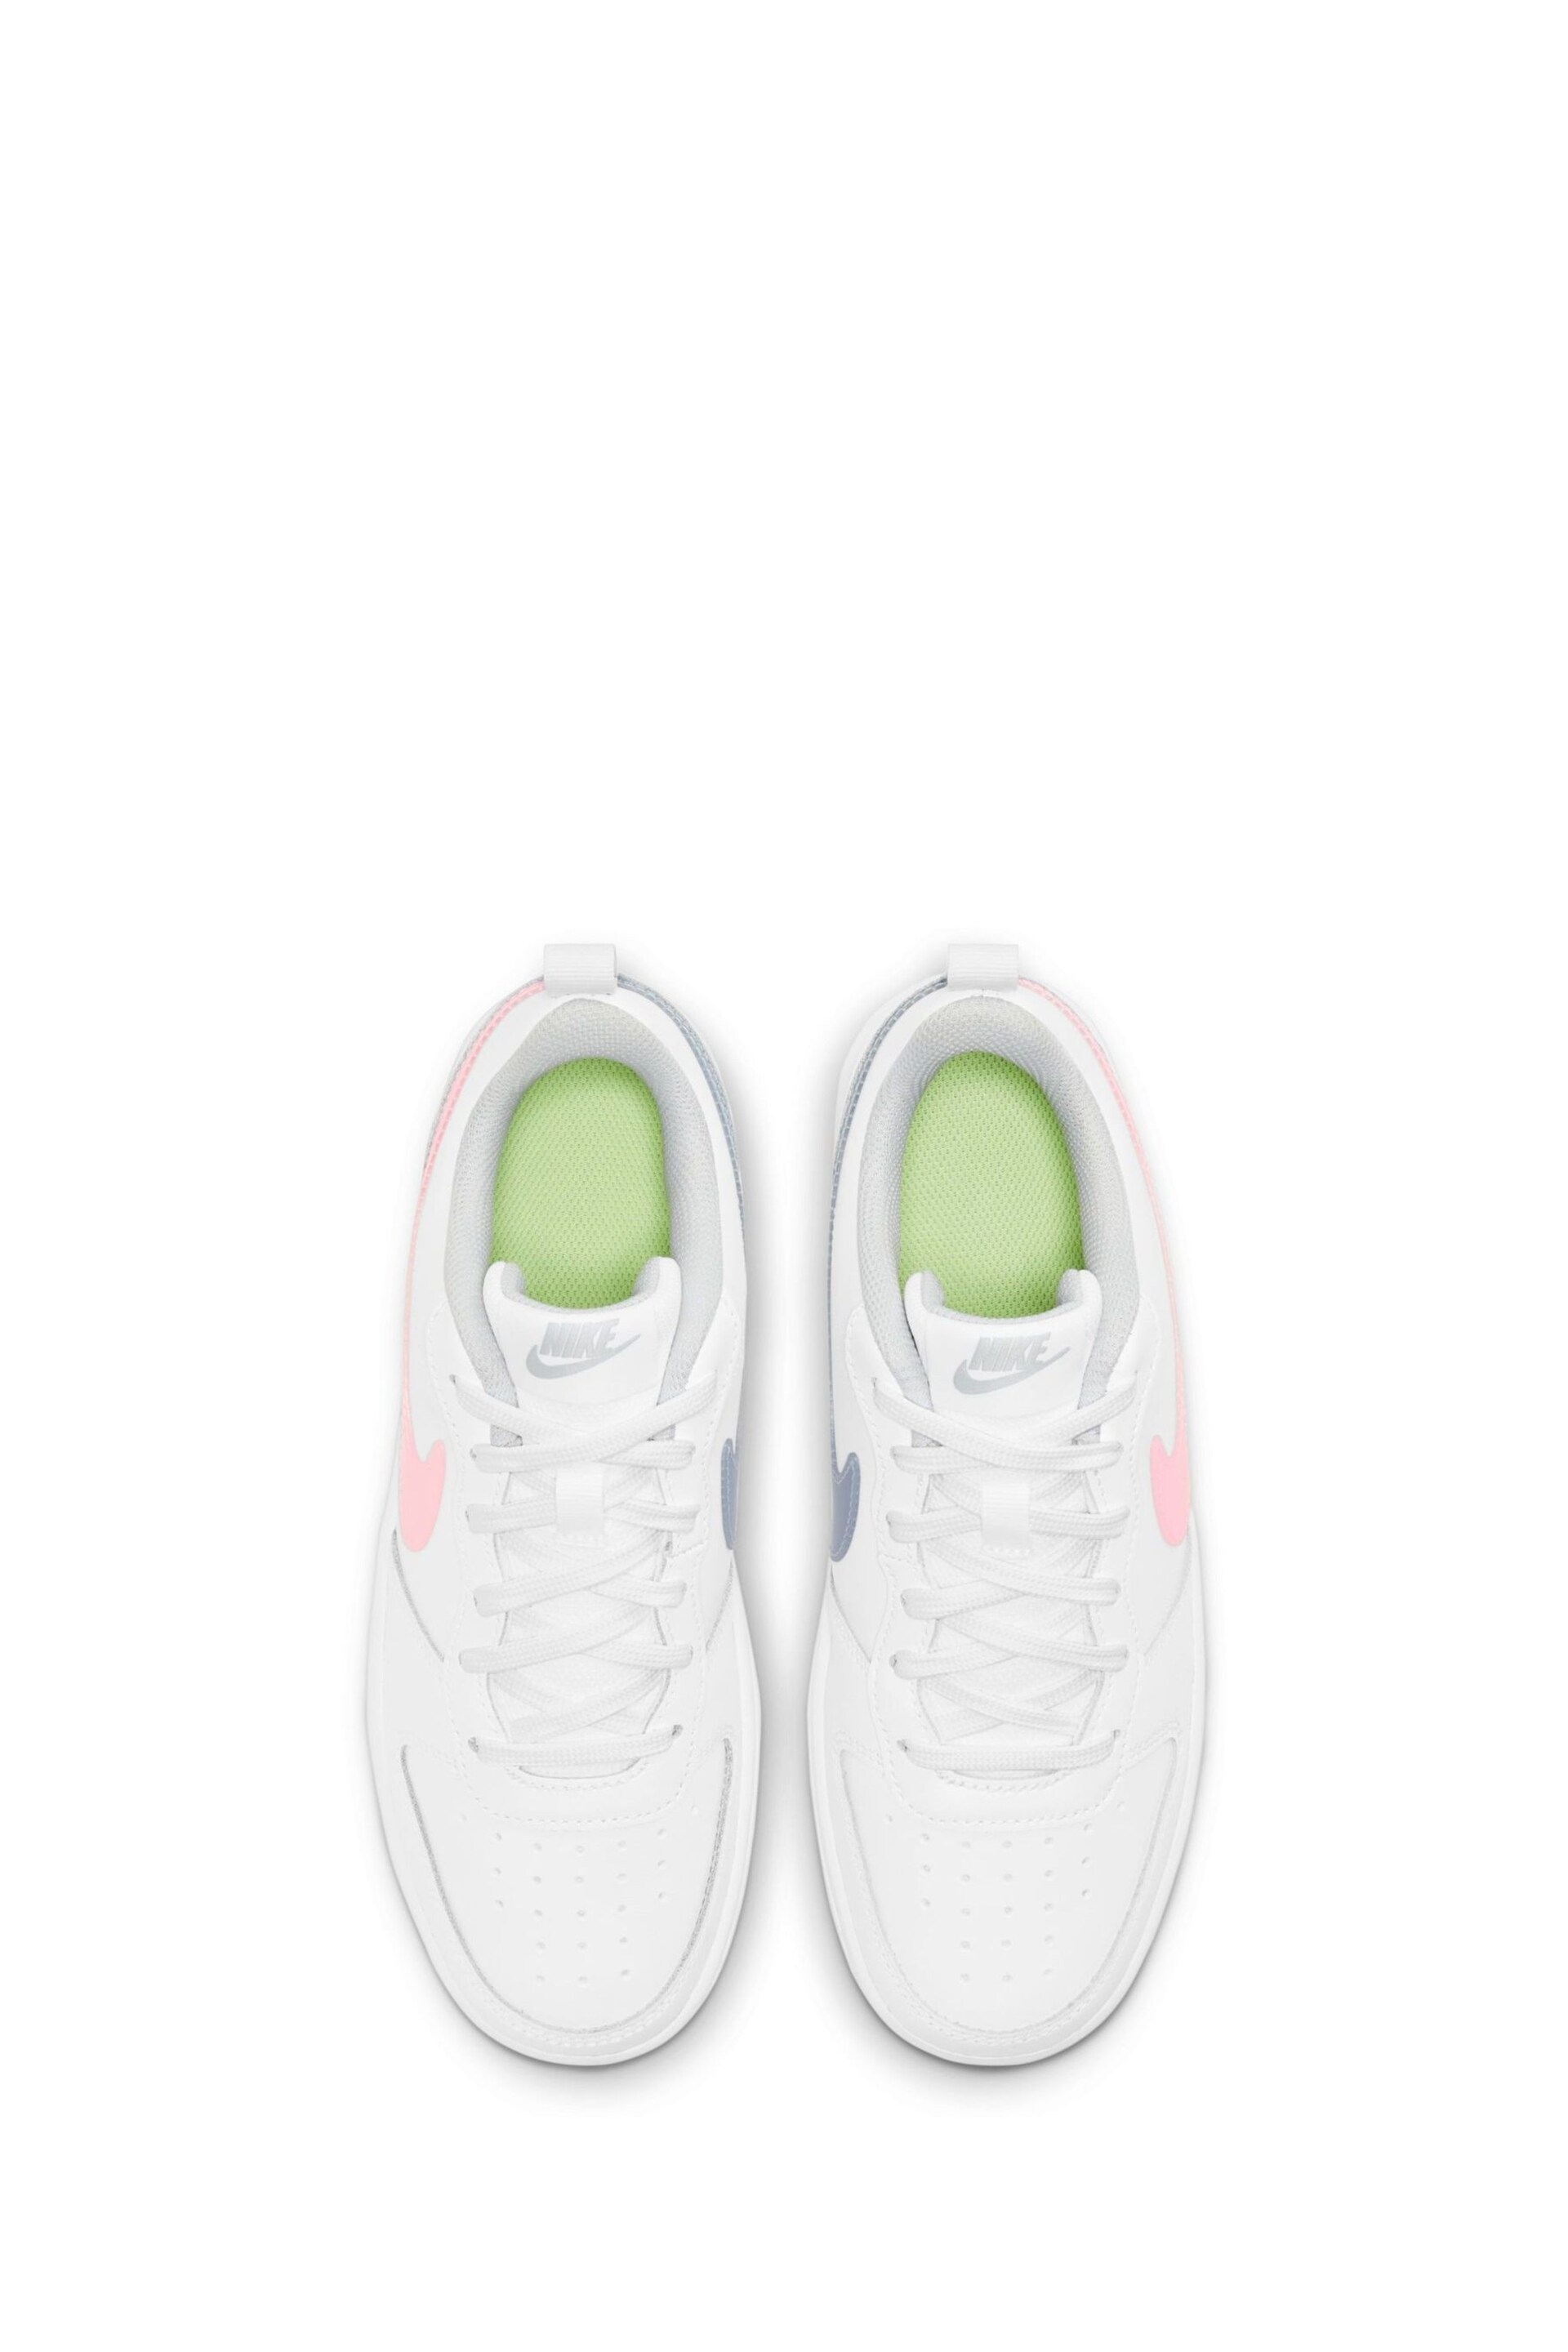 Nike White/Pink Court Borough Low Youth Trainers - Image 5 of 8